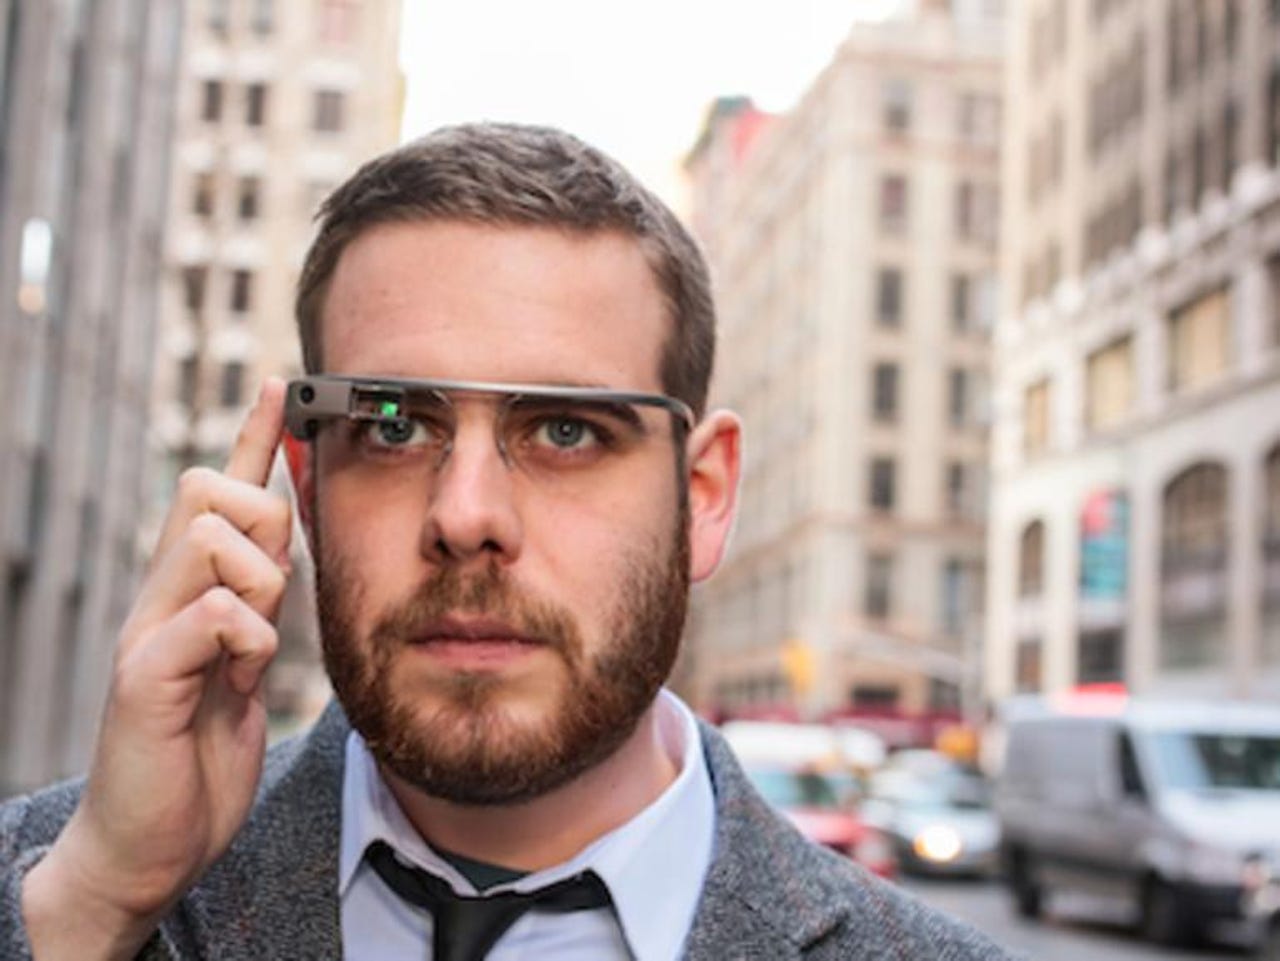 google-glass-the-most-personal-piece-of-tech-you-may-never-own.jpg